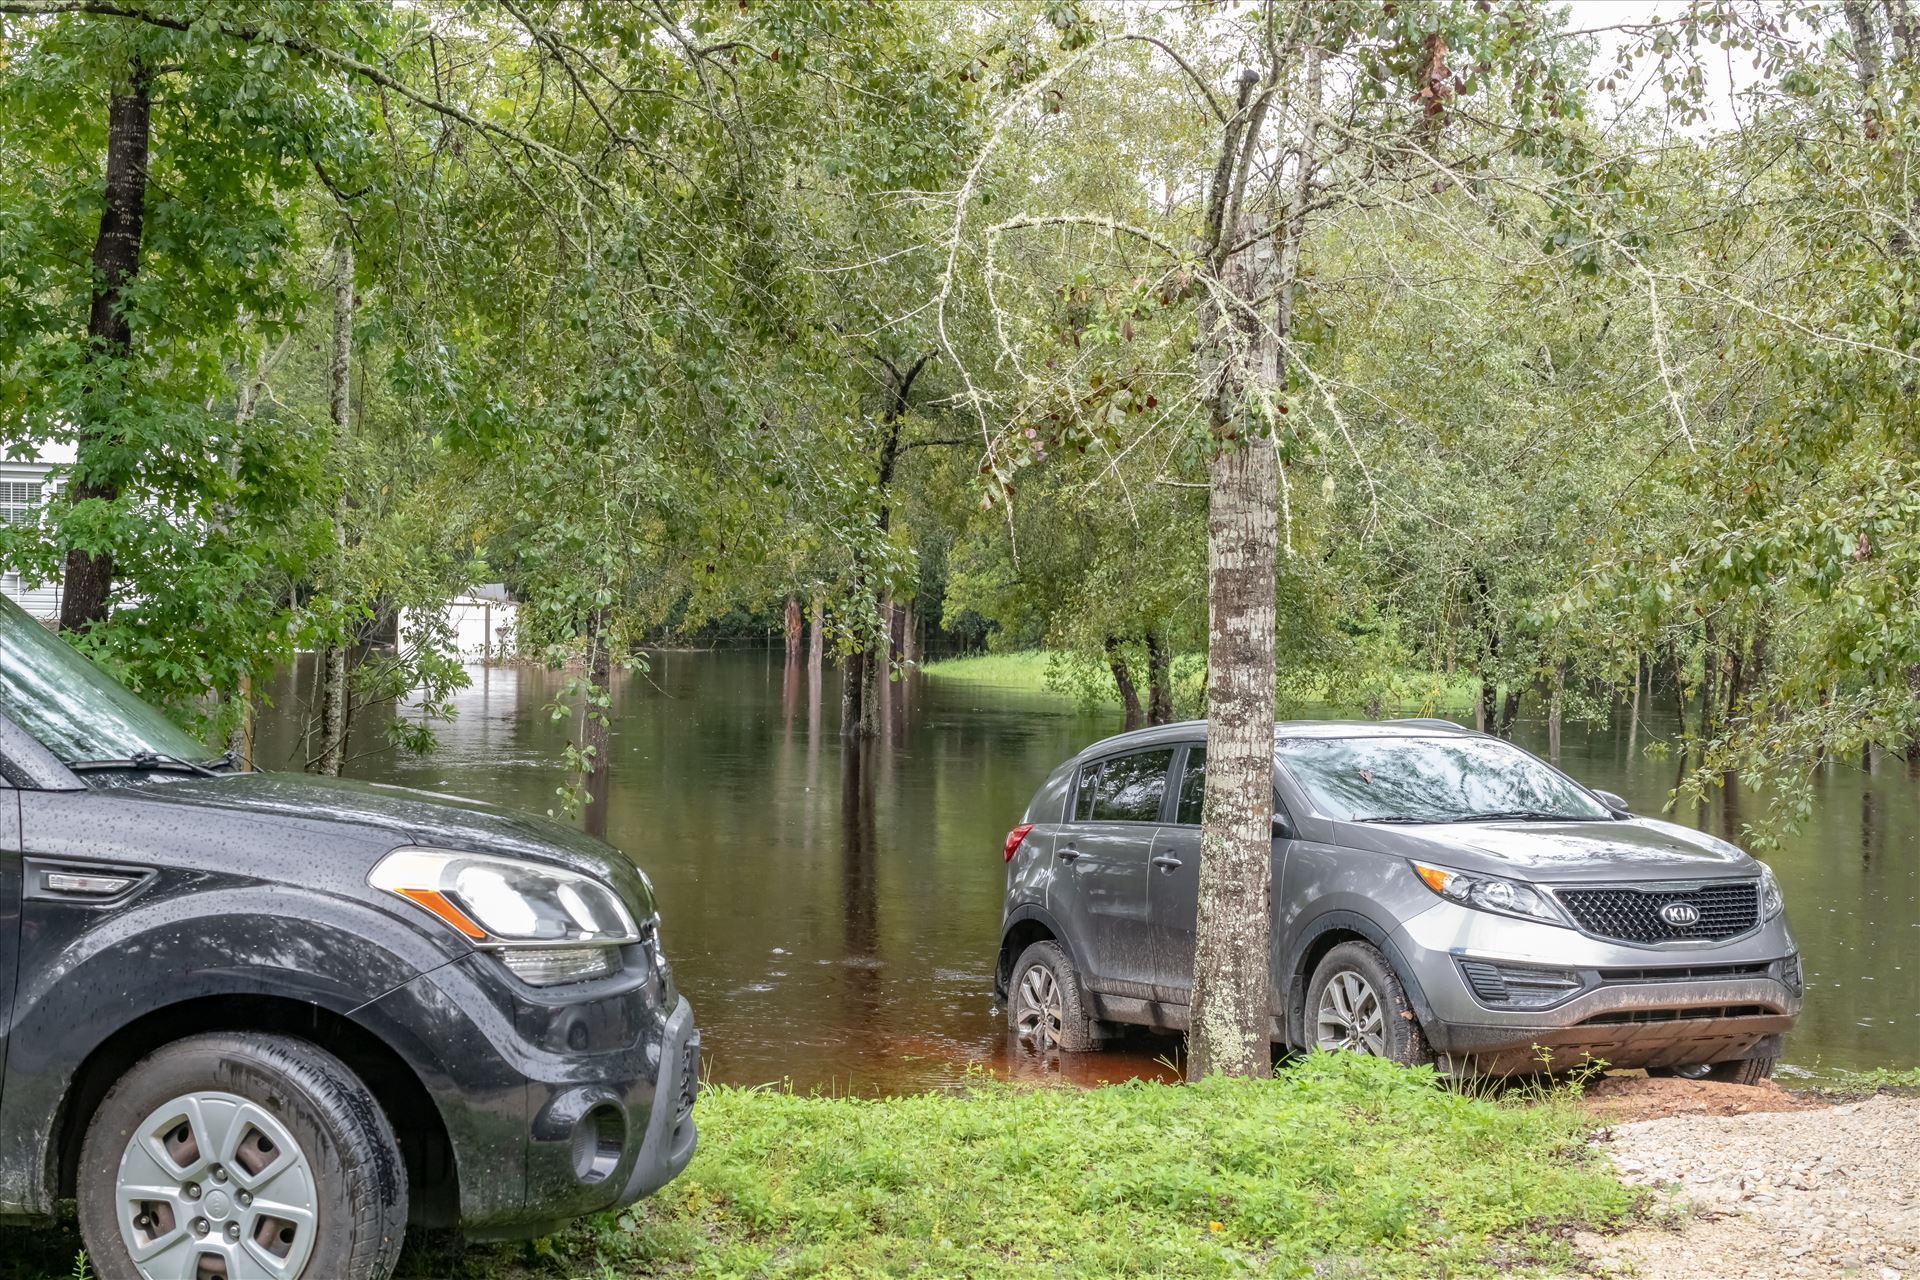 bear creek out of bank 8 August 02, 2018.jpg - August 02, 2018 heavy rains flooded many parts of Bay County, Florida. This photo is in the Bear Creek area. by Terry Kelly Photography